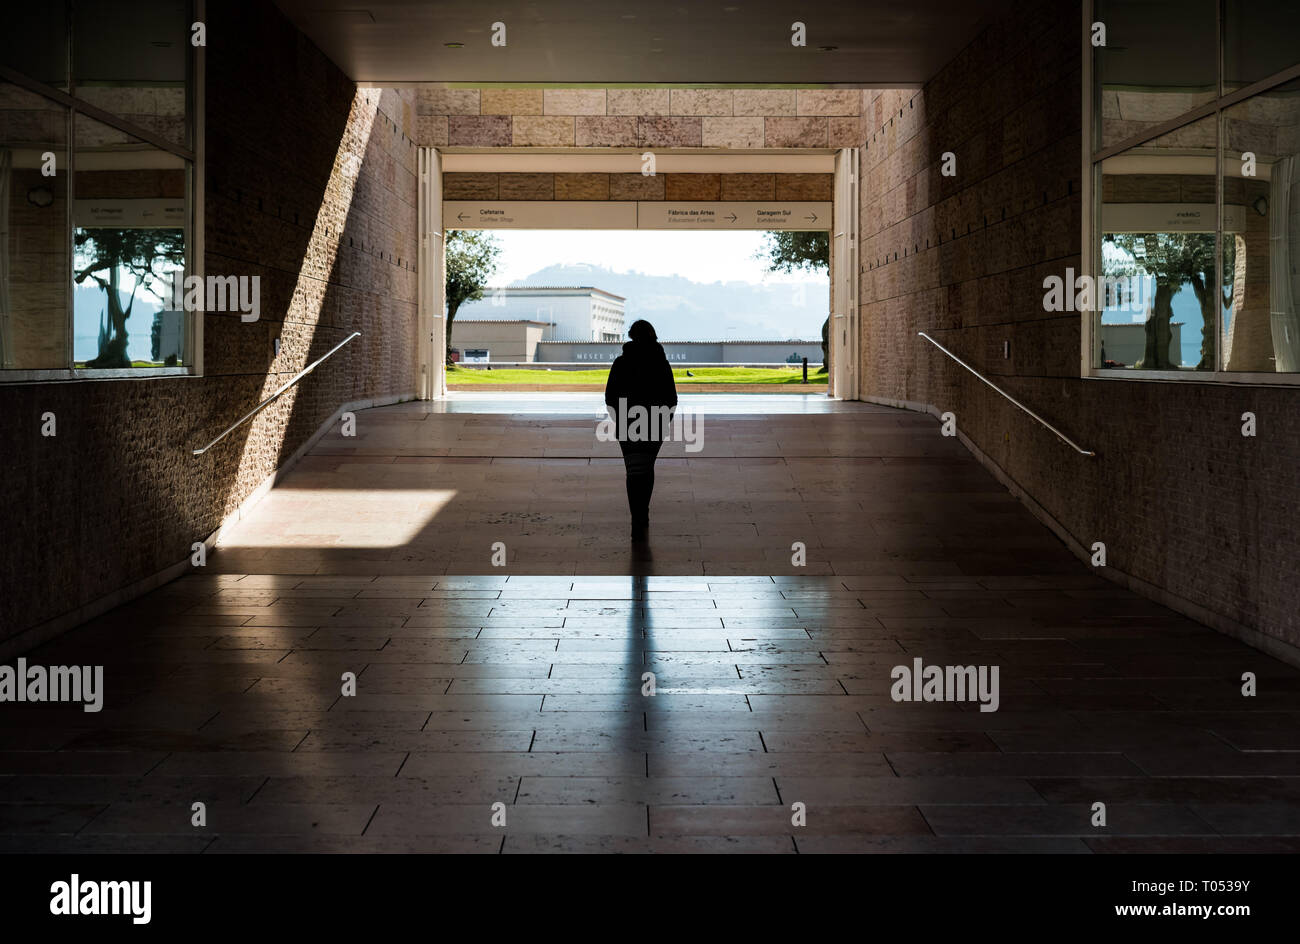 Belem, Lisbon / Portugal - 12 28 2018: Young white woman with small backpack walking through the museum of contemporary art Stock Photo